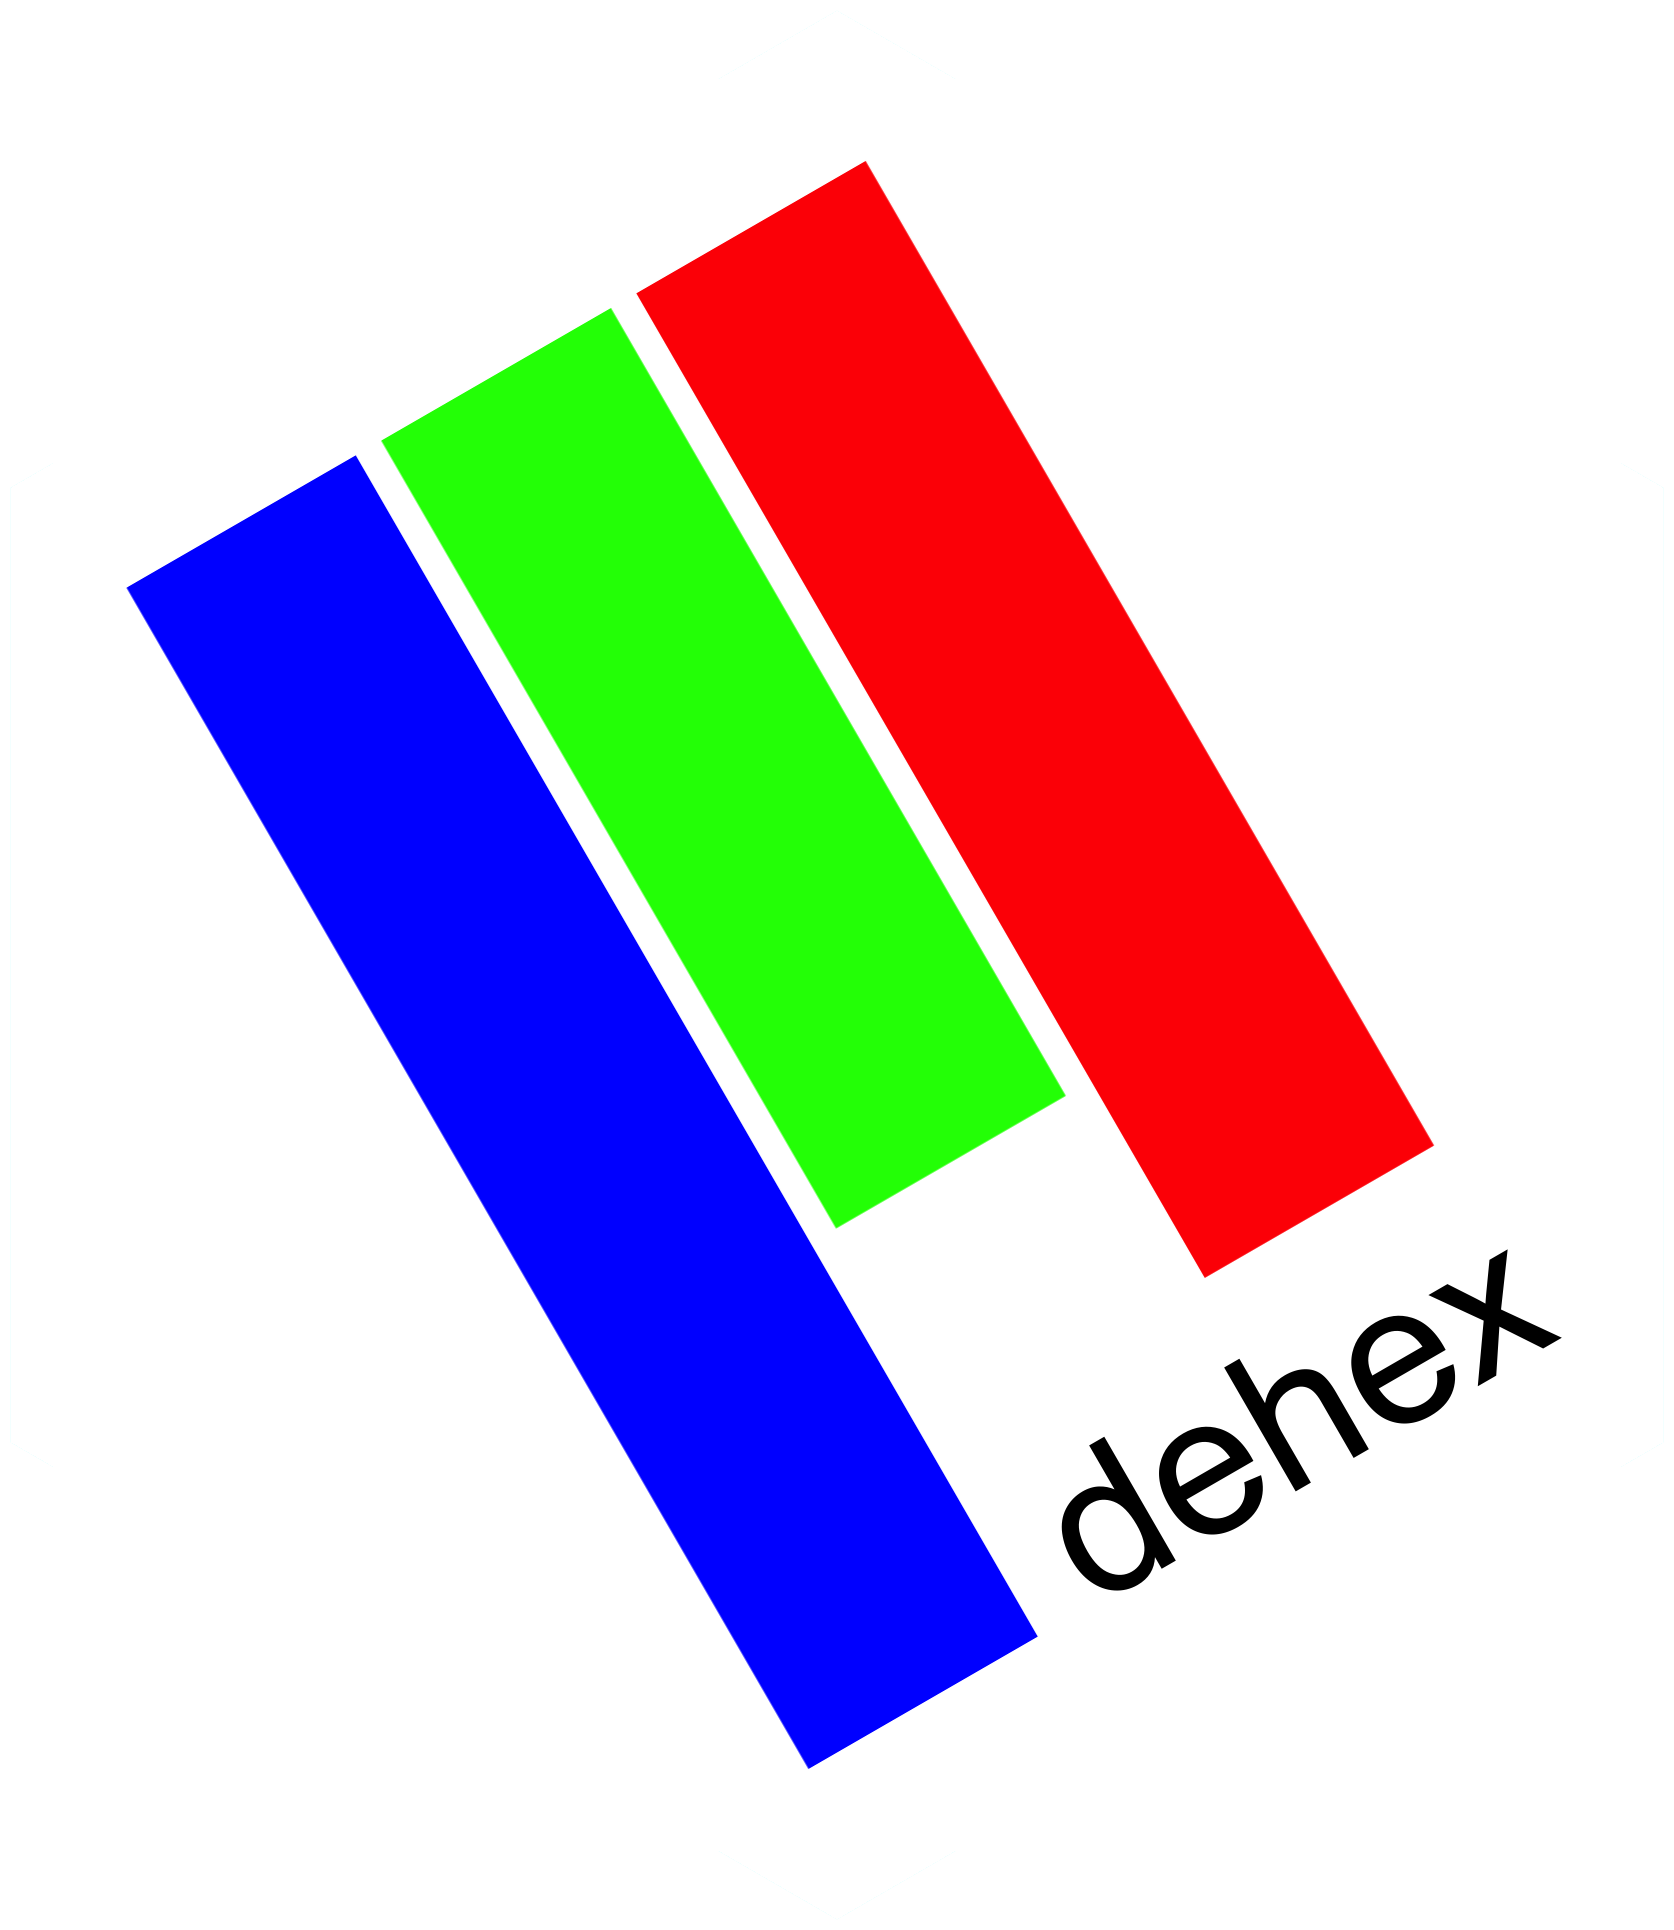 A hexagon-shaped logo with the text 'dehex' in the lower right and a bar chart with a single red, green and blue bar that originates in the top left.